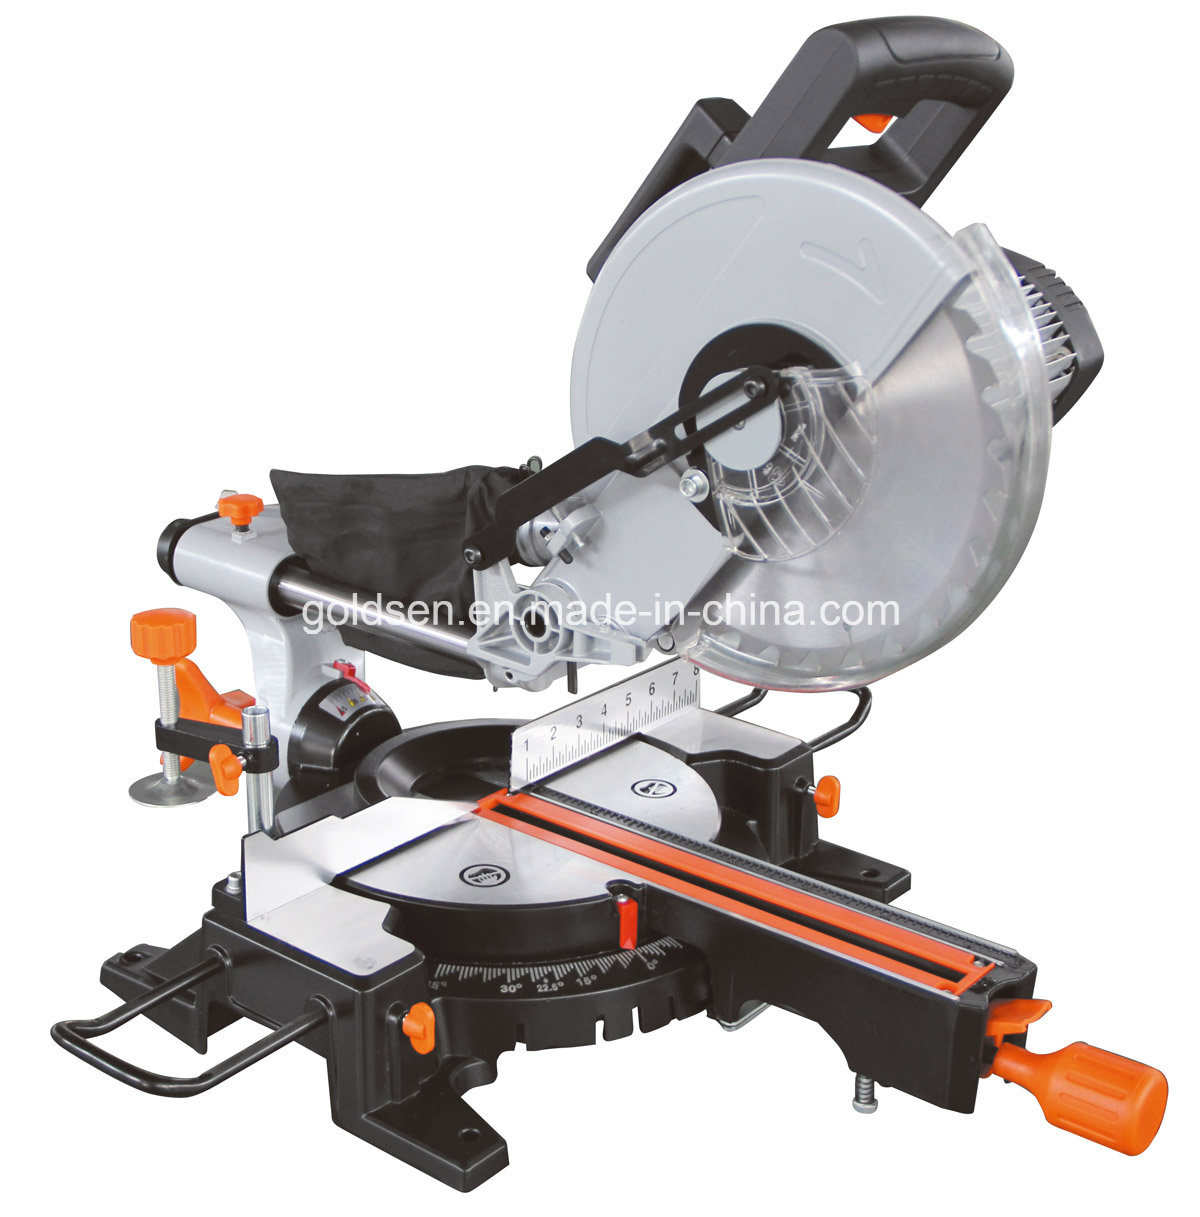 255mm Professional Power Aluminum/Wood Cutting Machine Table Miter Circular Saw Induction Motor Portable Electric Wood Cutting Saws (GW8020)